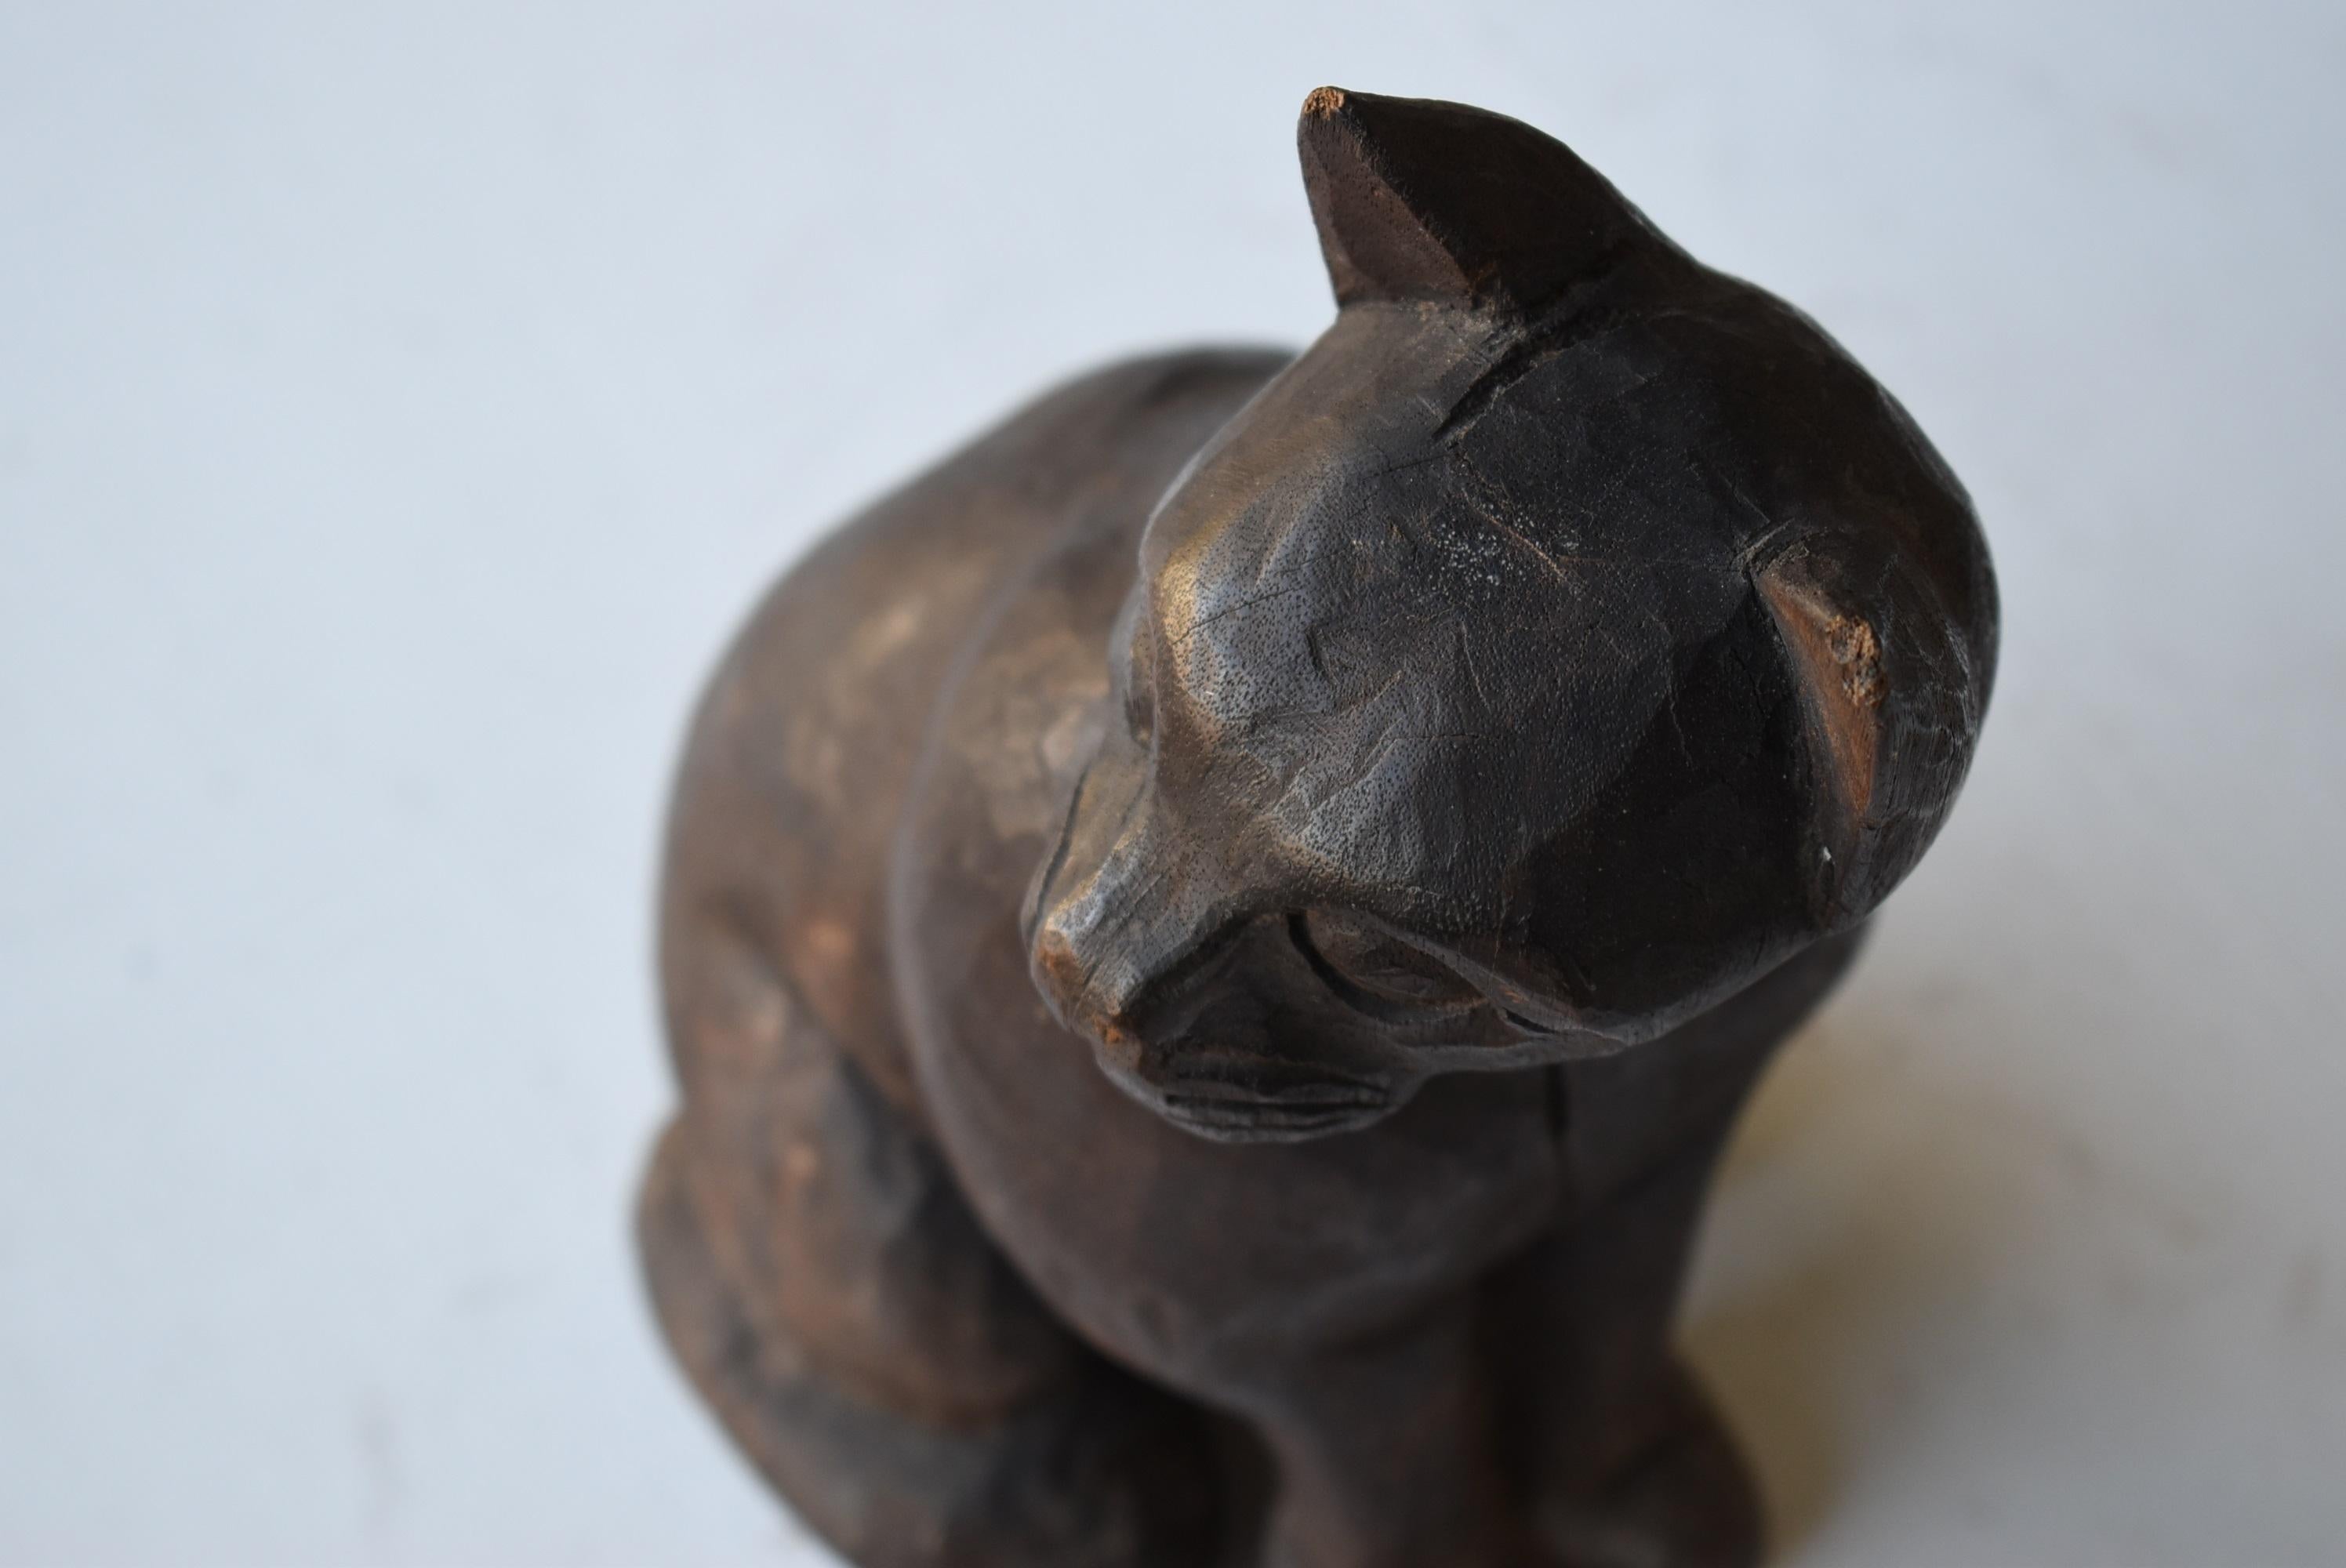 Japanese Antique Wood Carving Cat 1860s-1920s /Figurine Animal Sculpture Object 6